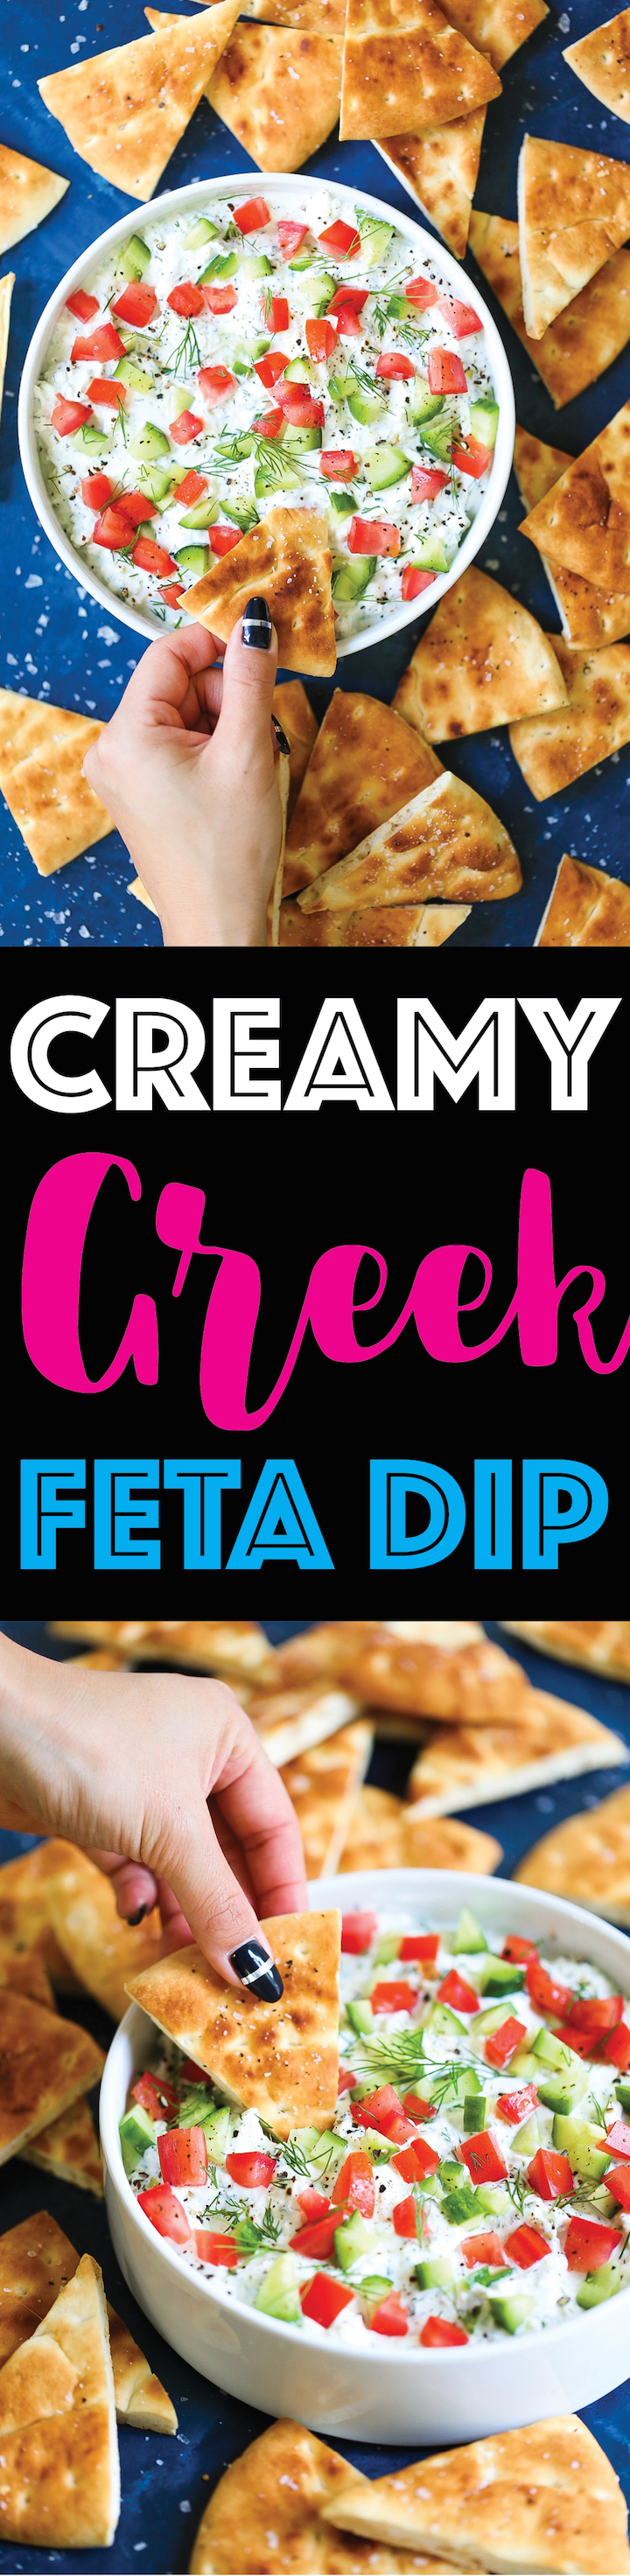 Creamy Greek Feta Dip - Such a simple yet creamy, satisfying dip that everyone will go crazy for! Takes just 15 minutes (or less) to whip up using feta, cream cheese, Greek yogurt, lemon juice and fresh herbs! You can even make this ahead of time and chill for up to 2 days! Serve with pita chips.